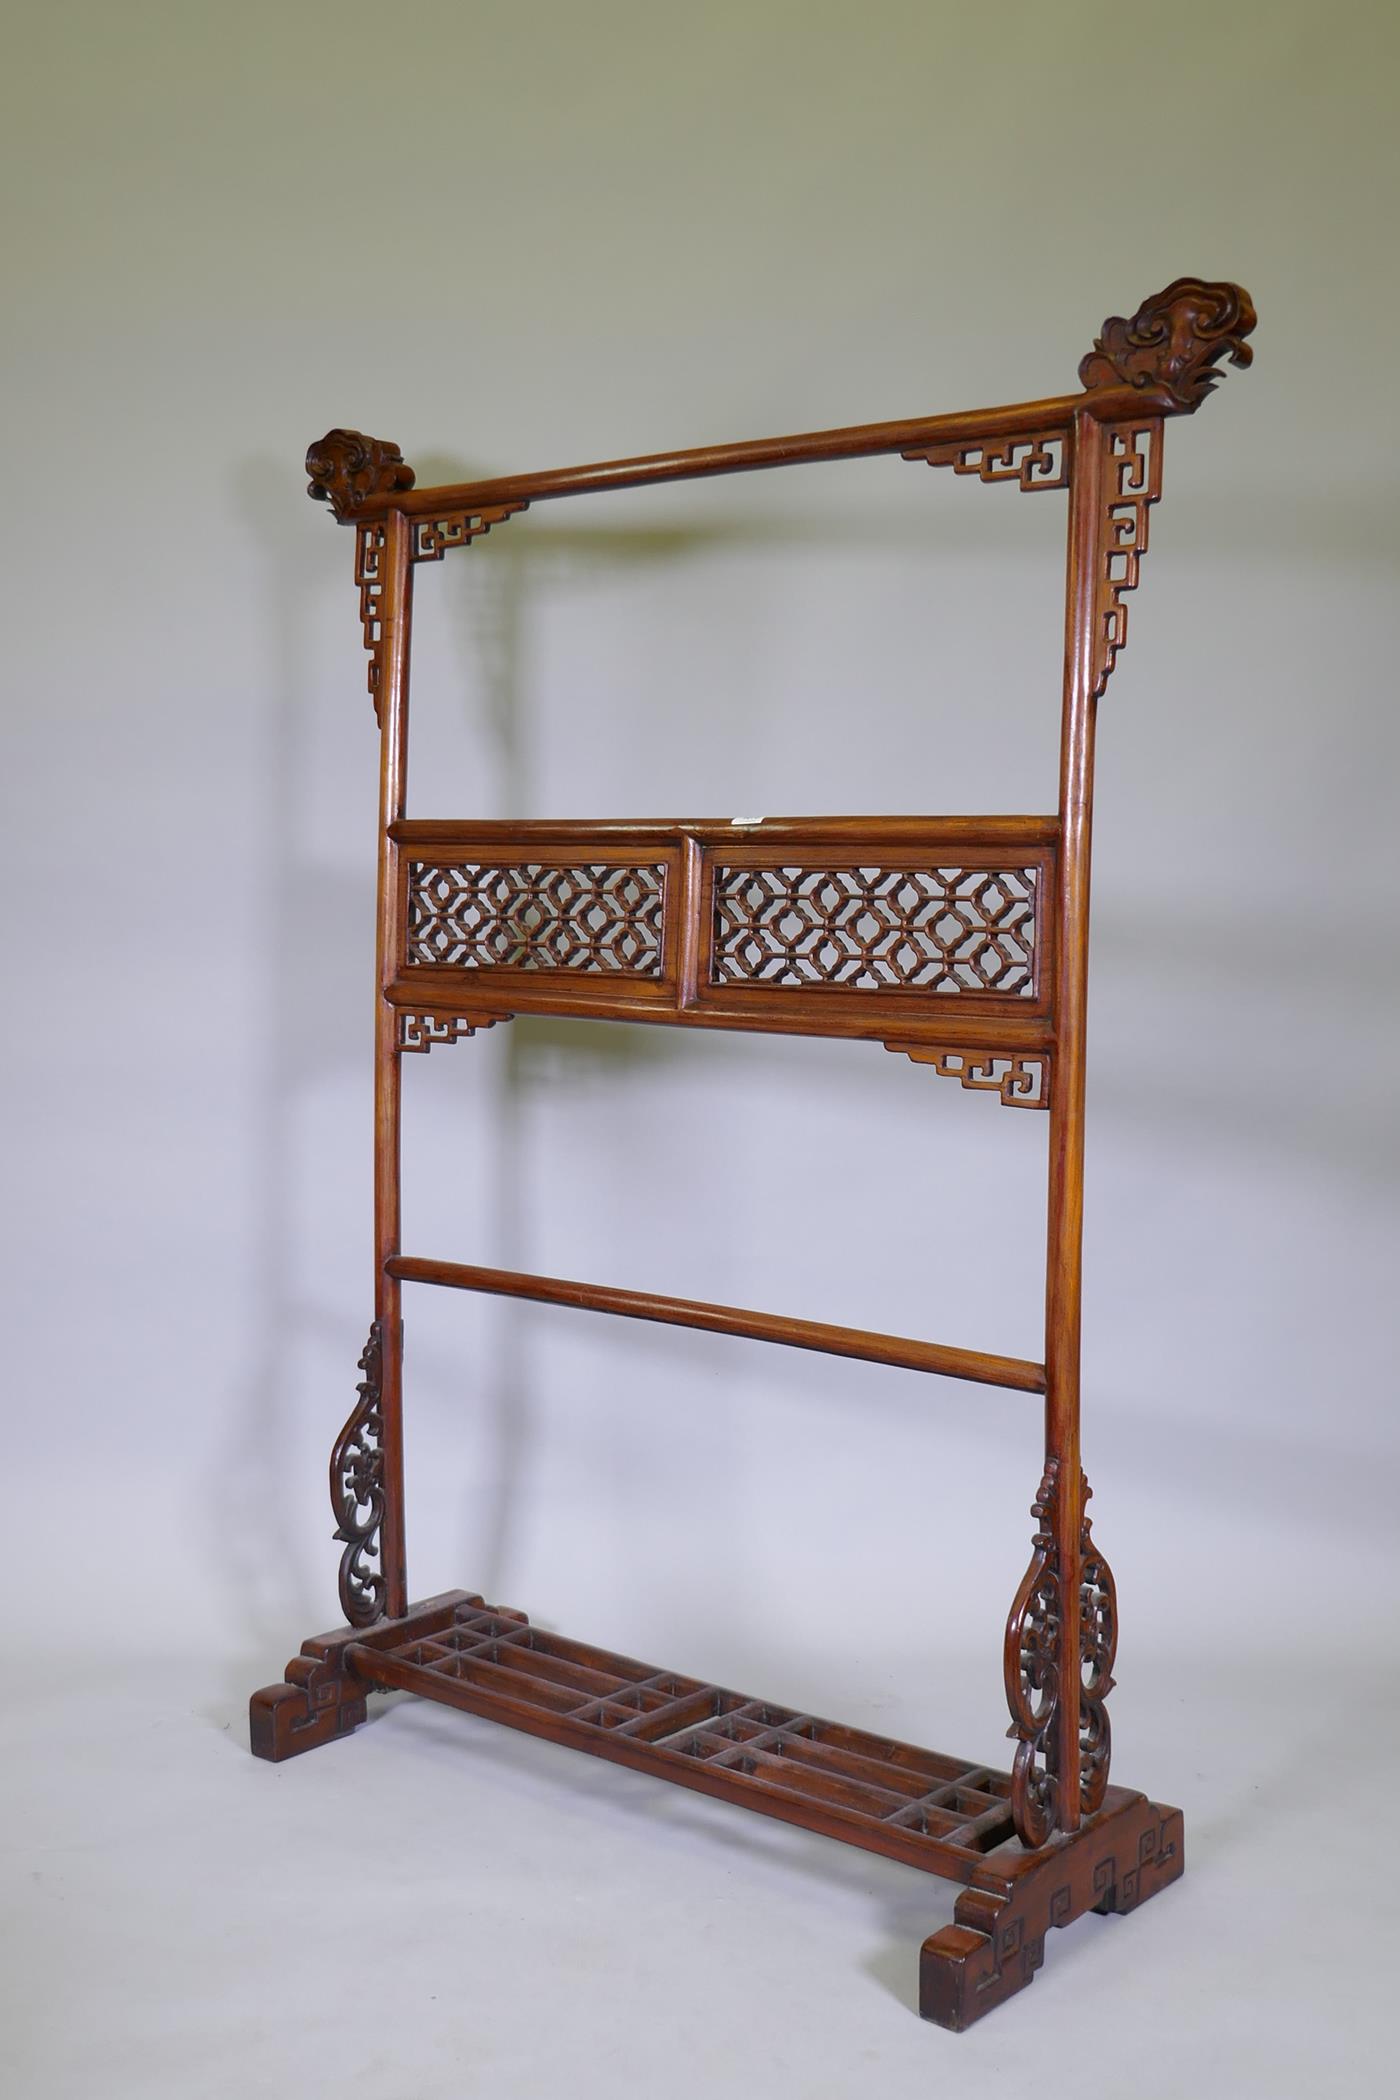 A Chinese carved wood robe rack with decorative pierced panels, 150cm high, 121cm wide - Image 2 of 5